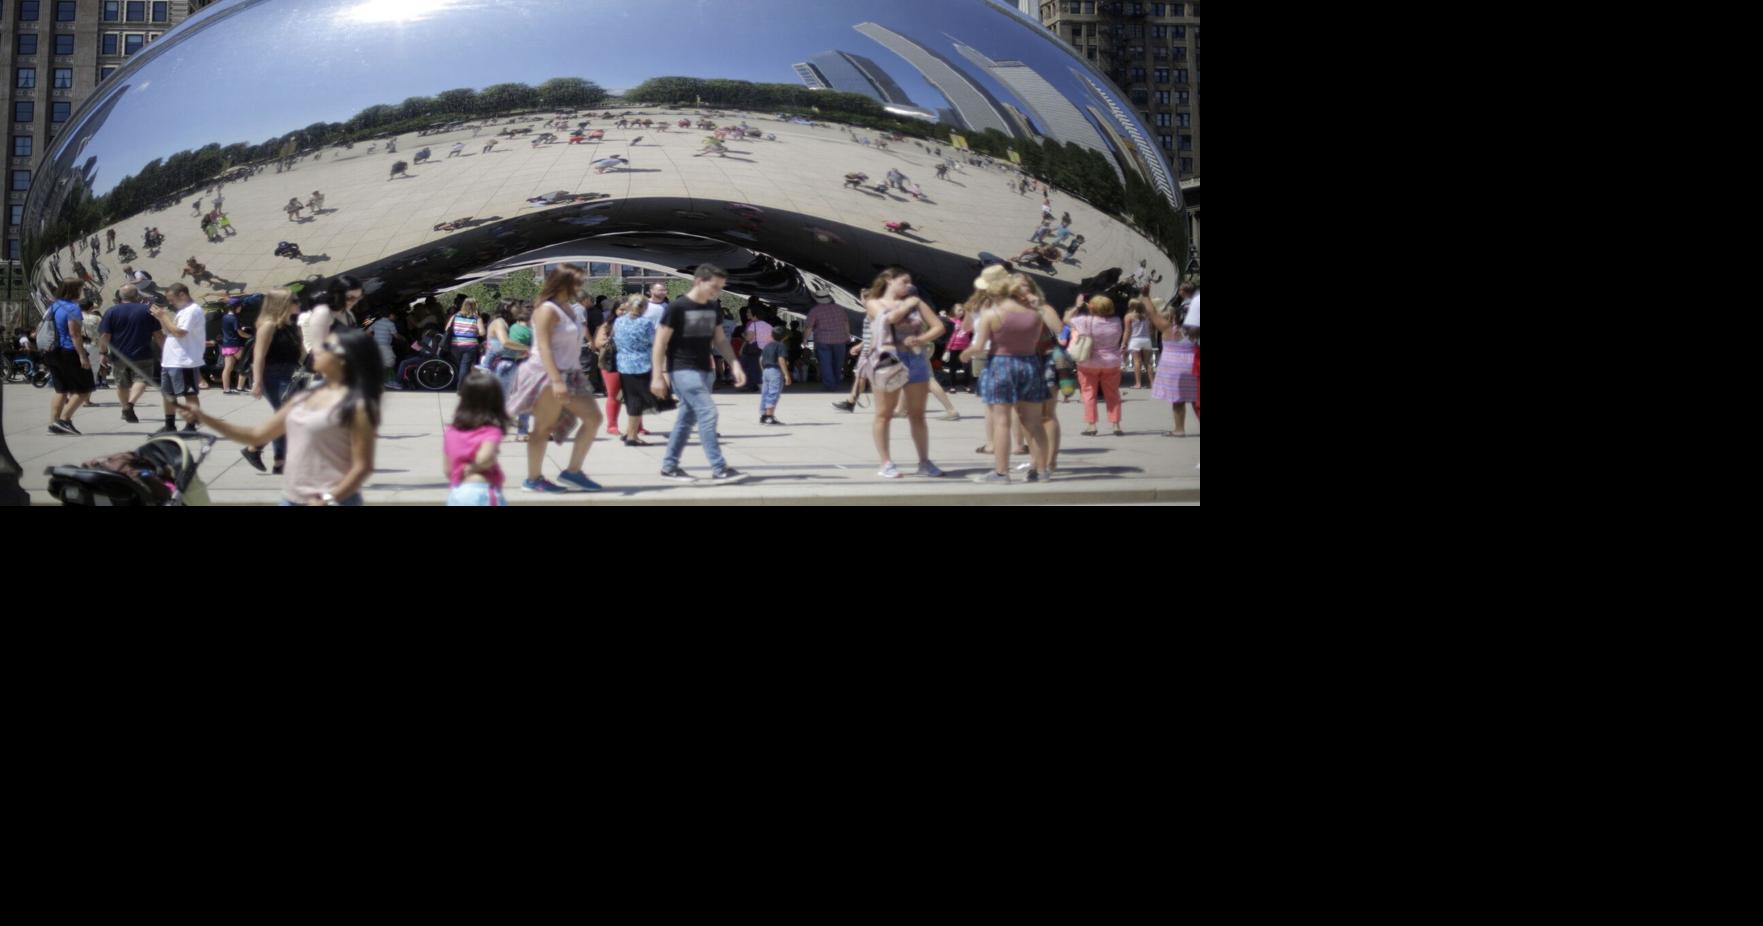 Construction at 'The Bean' in Chicago's Millennium Park to limit